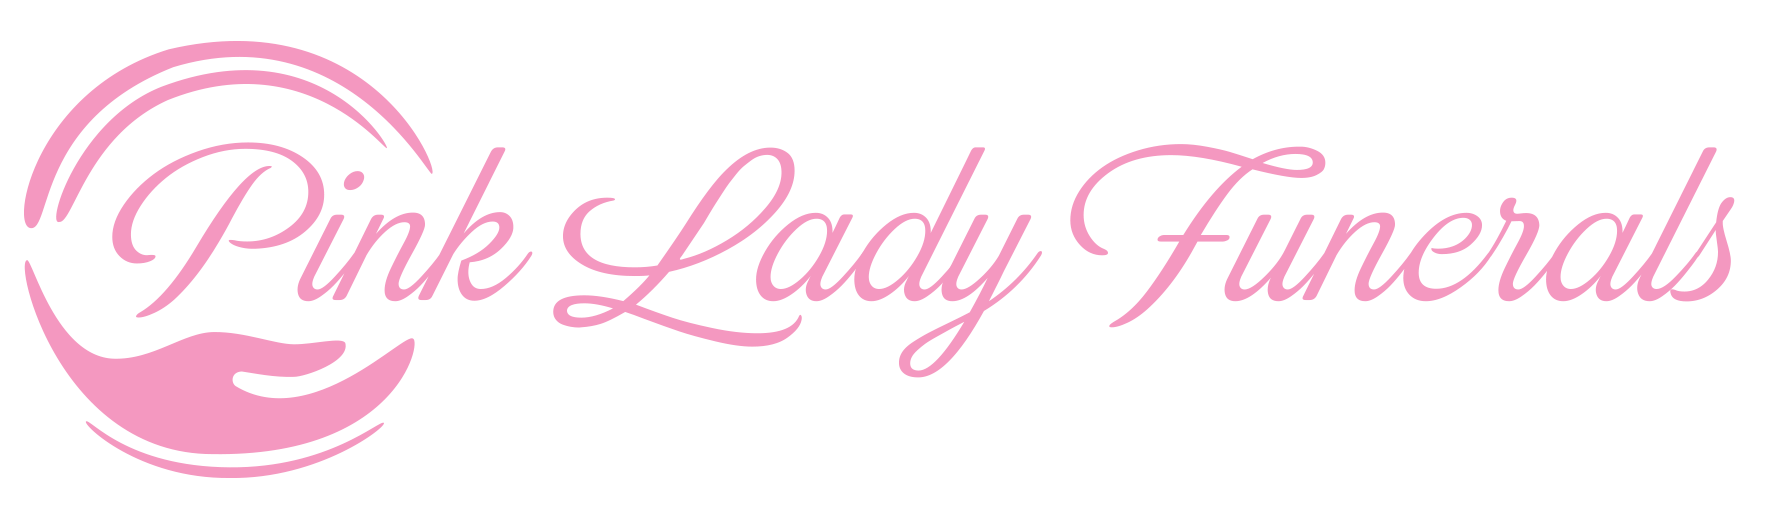 Pink Lady Funerals Provides Funeral Services in Newcastle